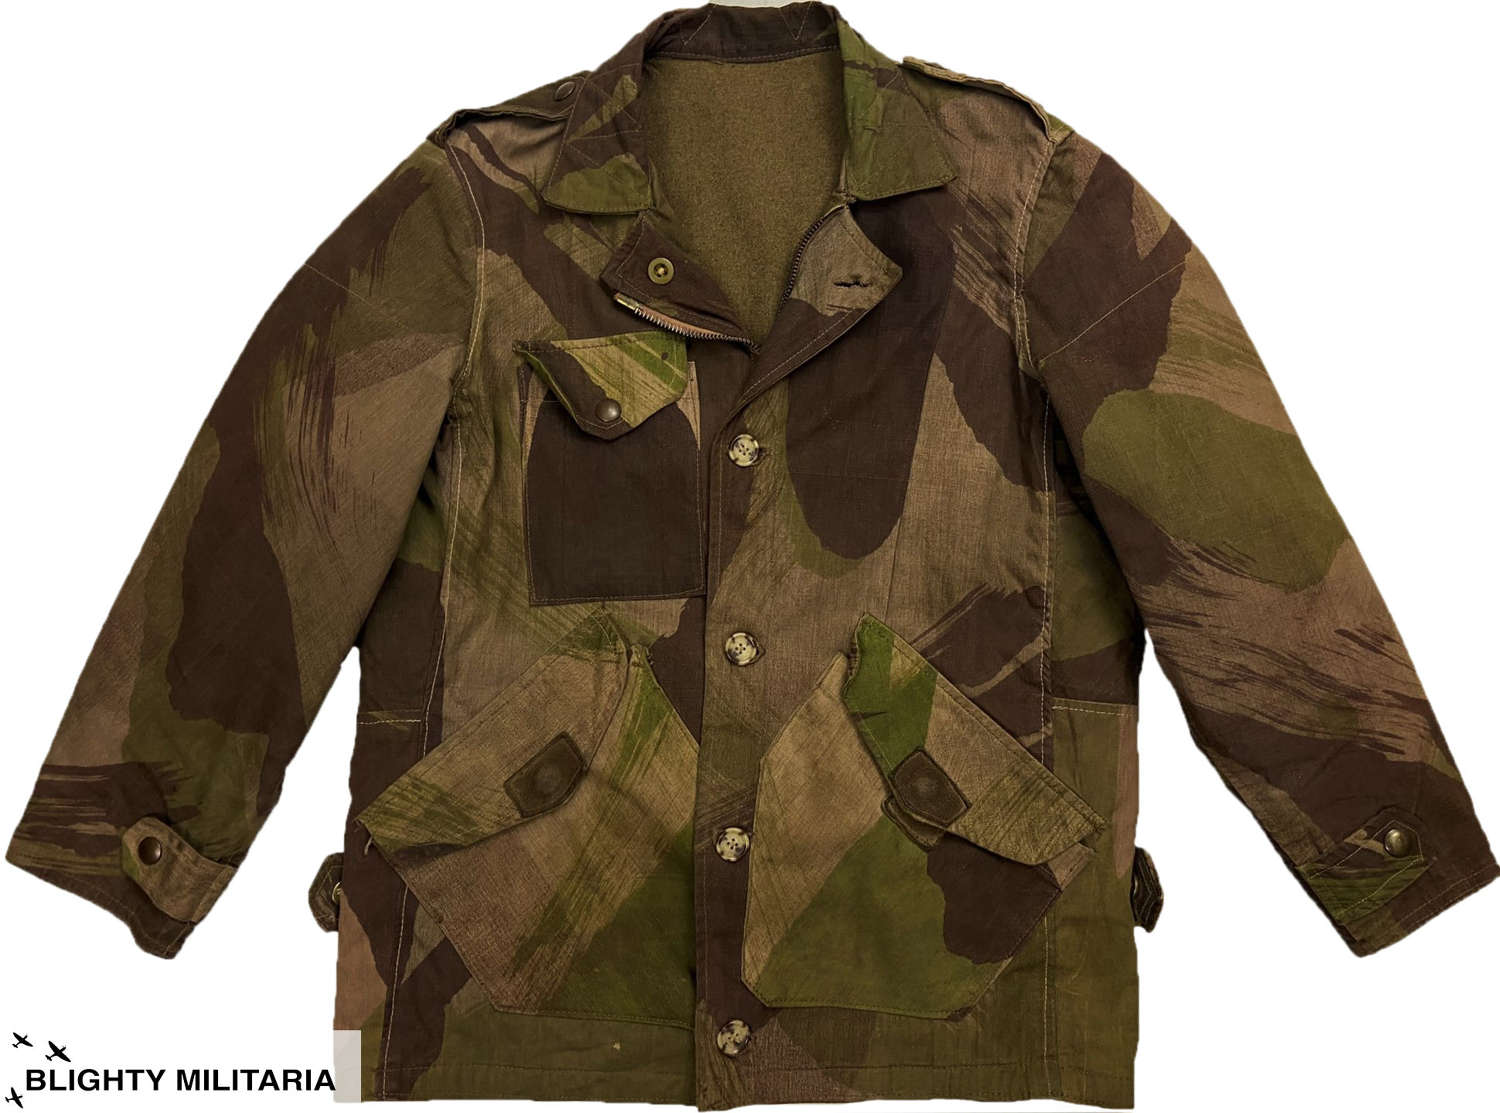 Incredible Cut Down 1944 Dated British Camouflage Tank Suit Jacket